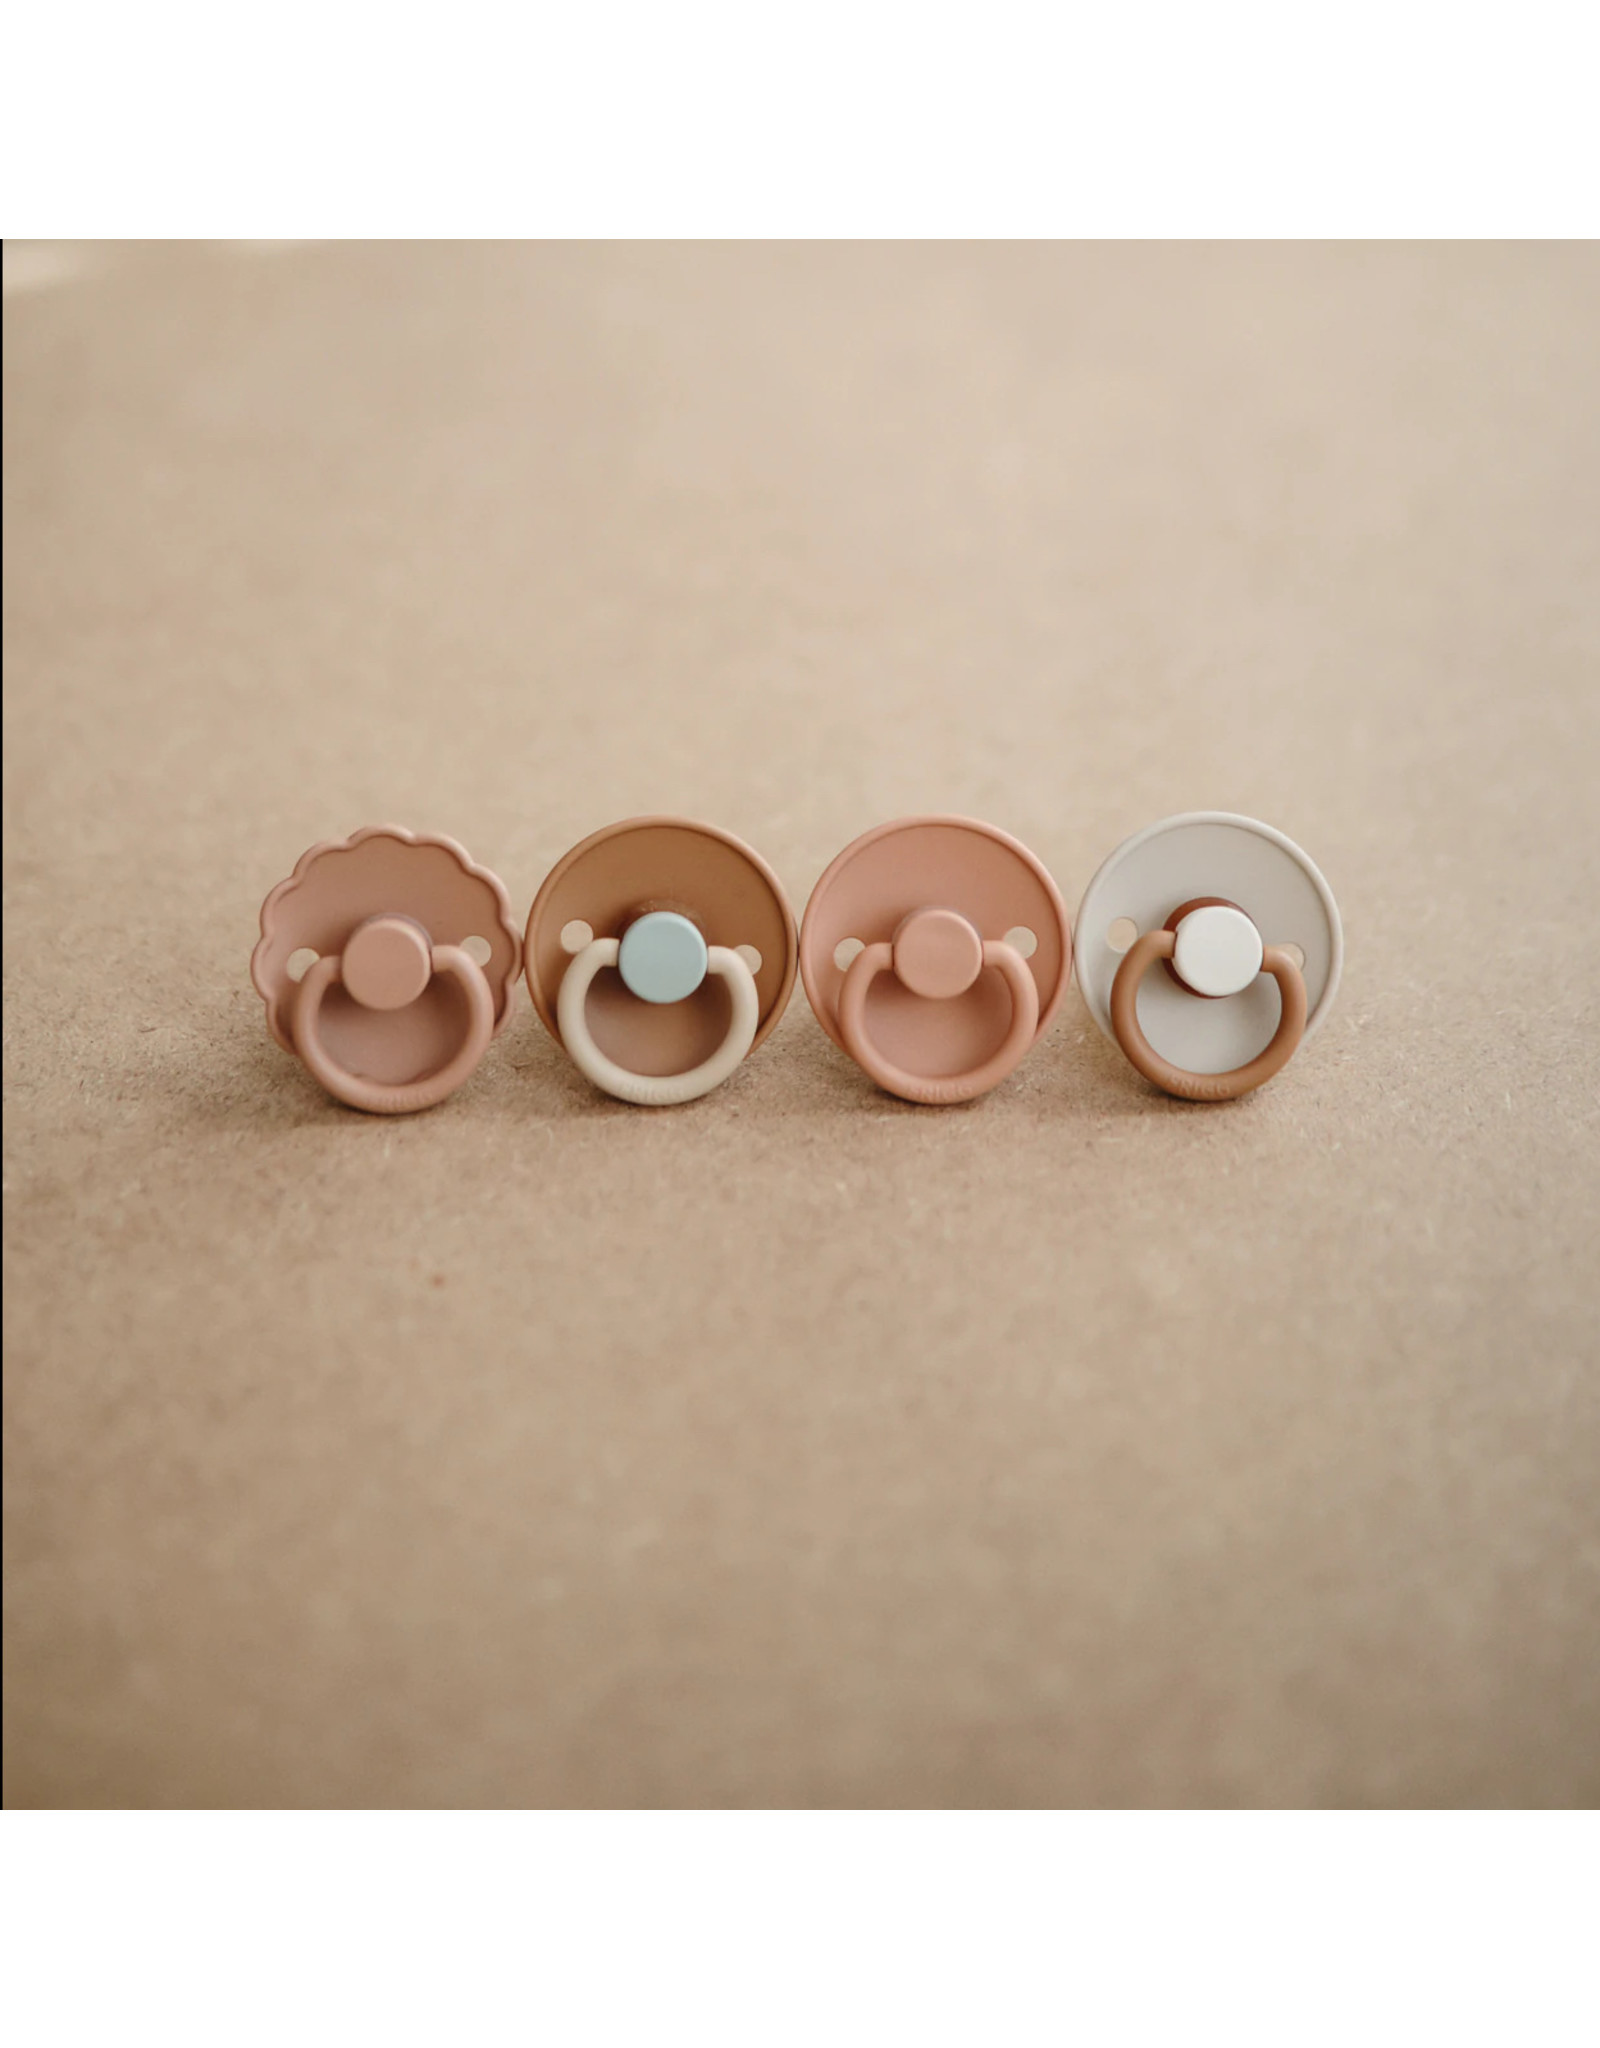 Frigg Natural Rubber Pacifier 0-6M Stage 1, Rose Gold